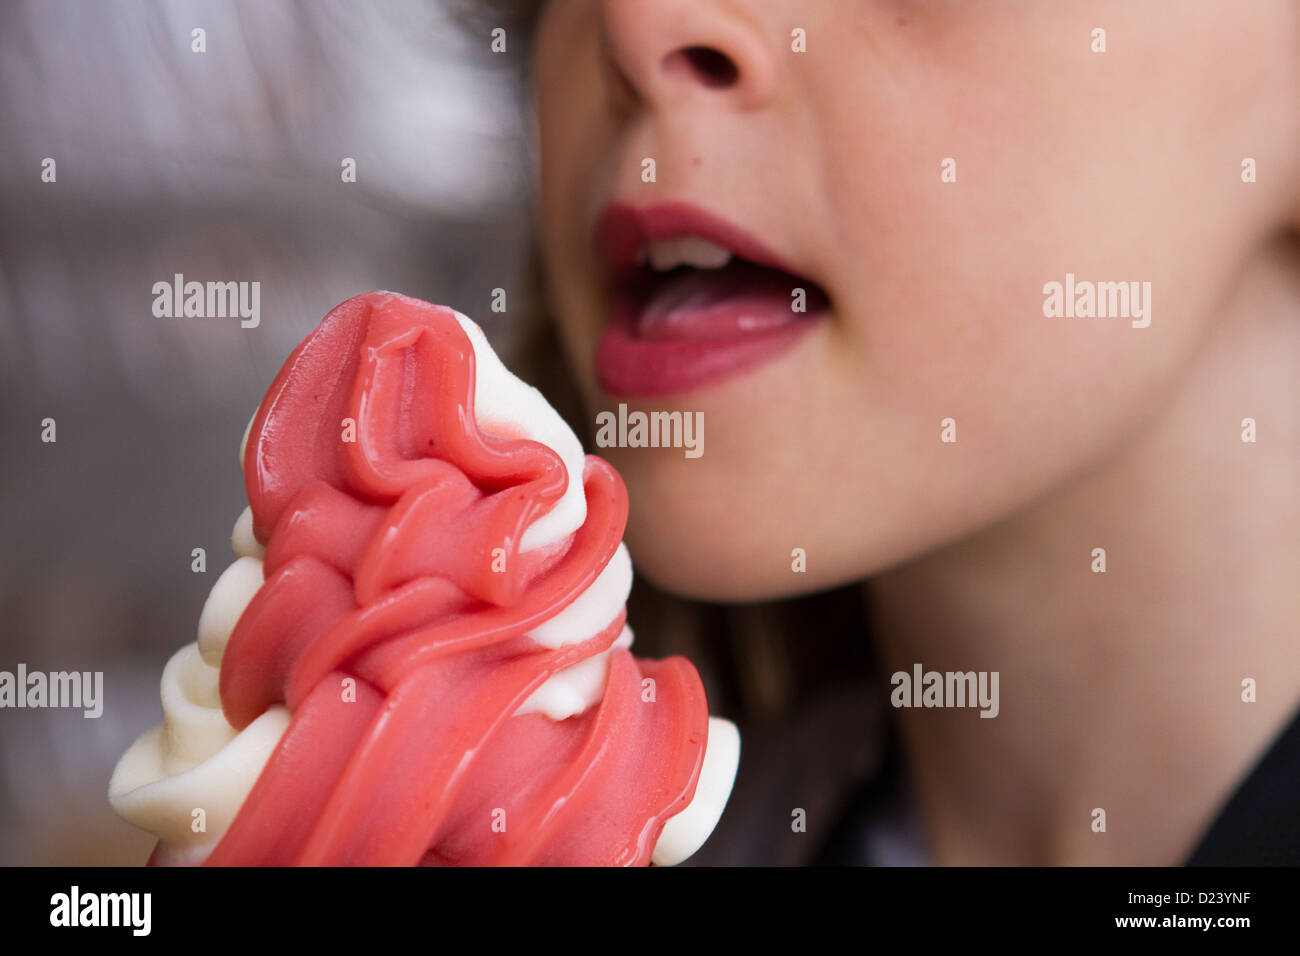 A girl about to take a bite or a lick from an ice-cream cone. Model Released. Stock Photo